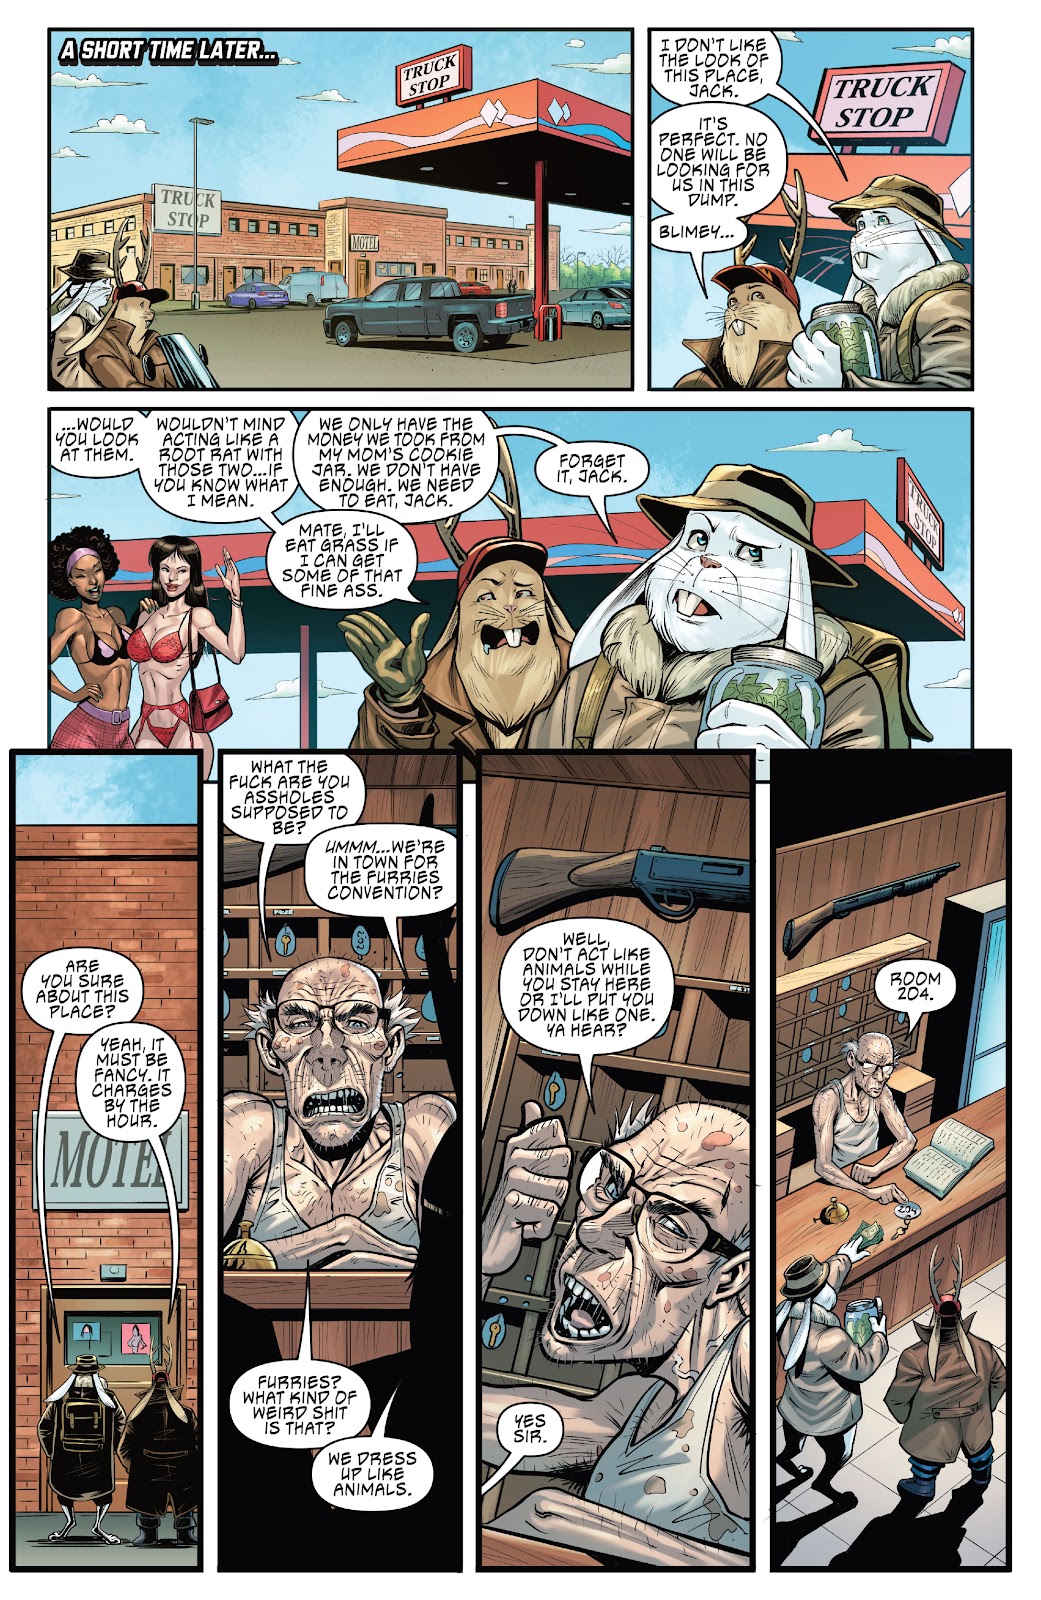 Man Goat & the Bunnyman: Green Eggs & Blam issue 2 - Page 11